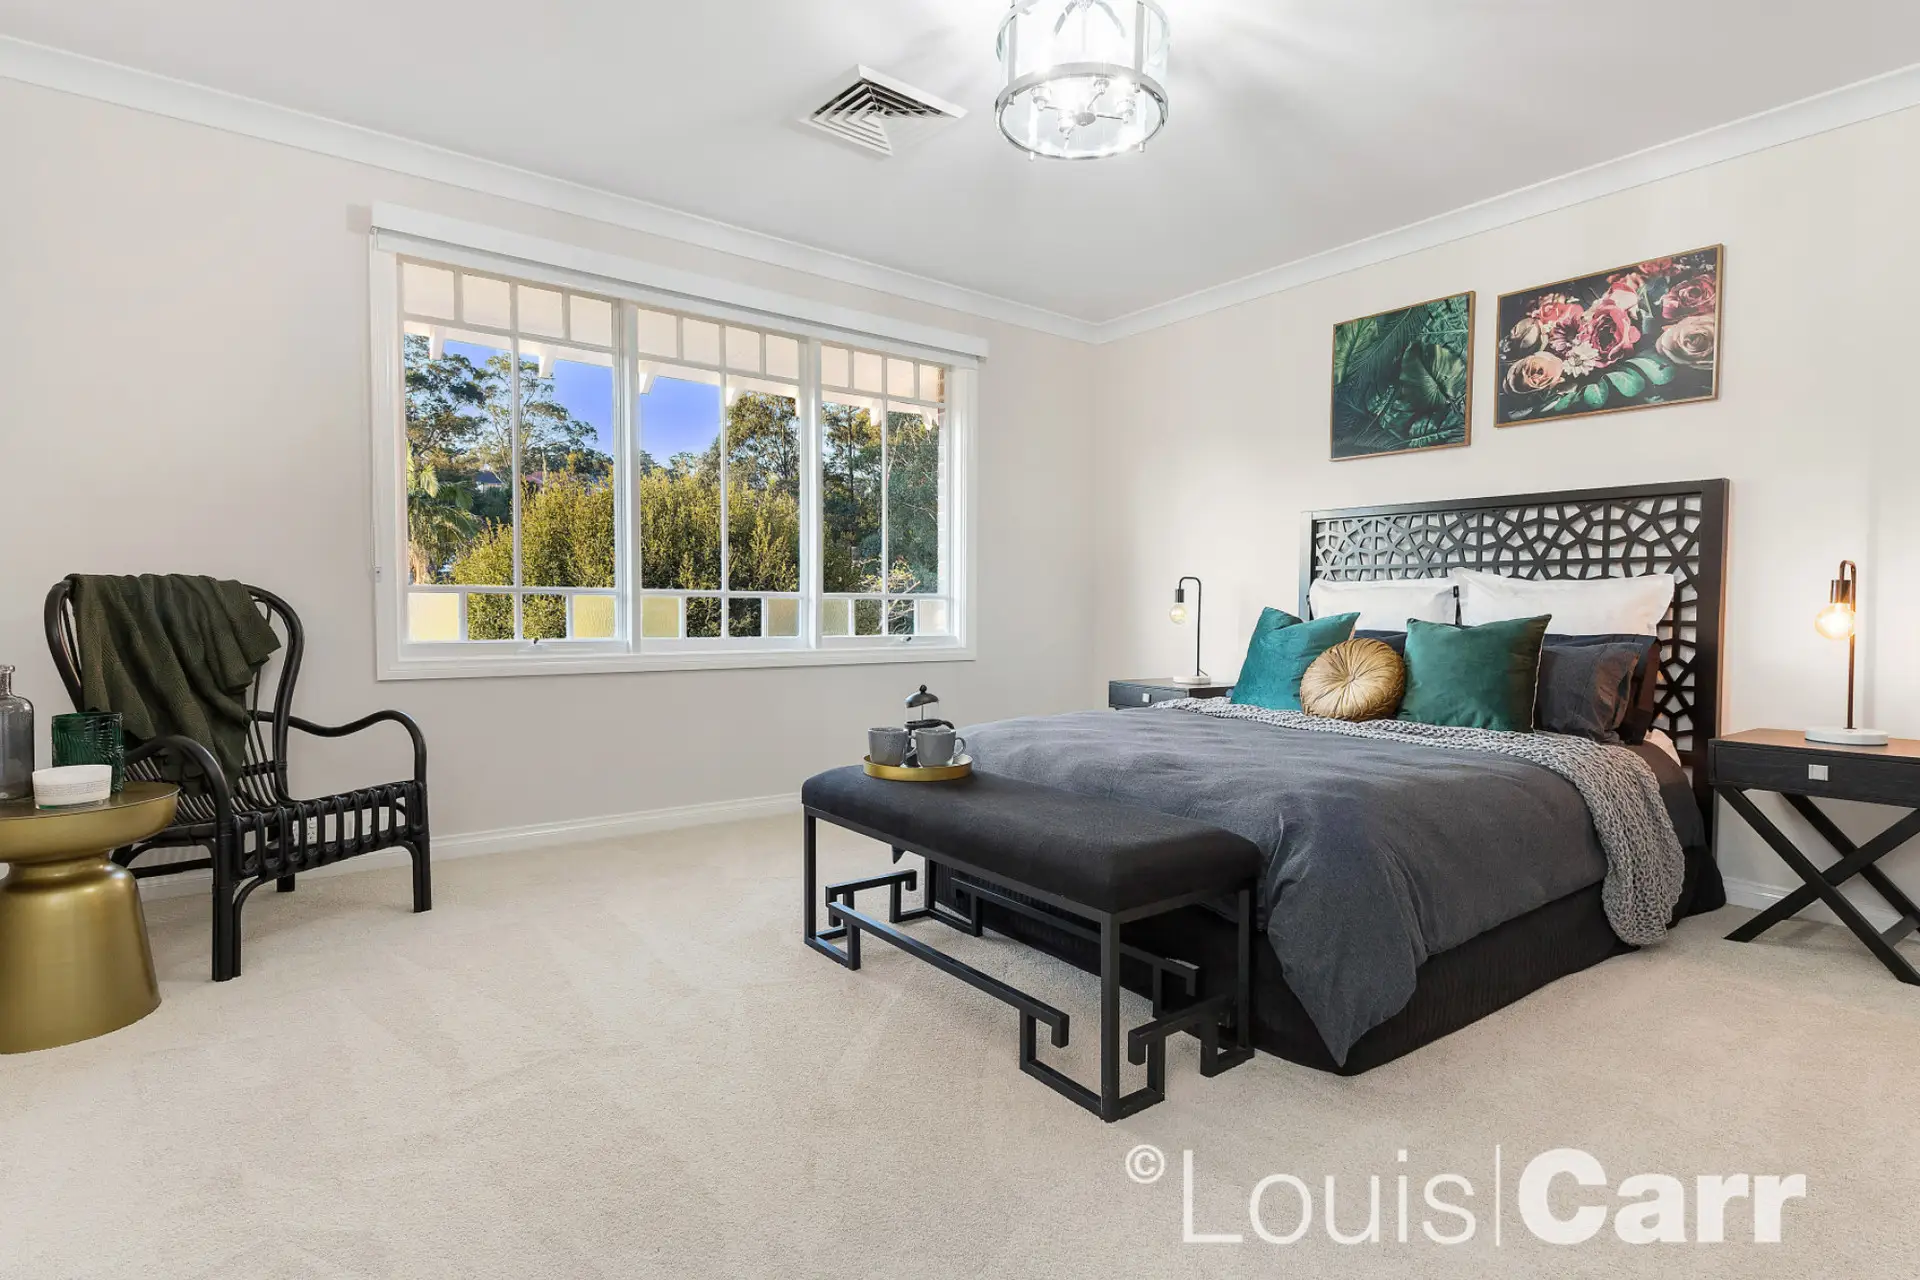 Photo #10: 11 Avonleigh Way, West Pennant Hills - Sold by Louis Carr Real Estate